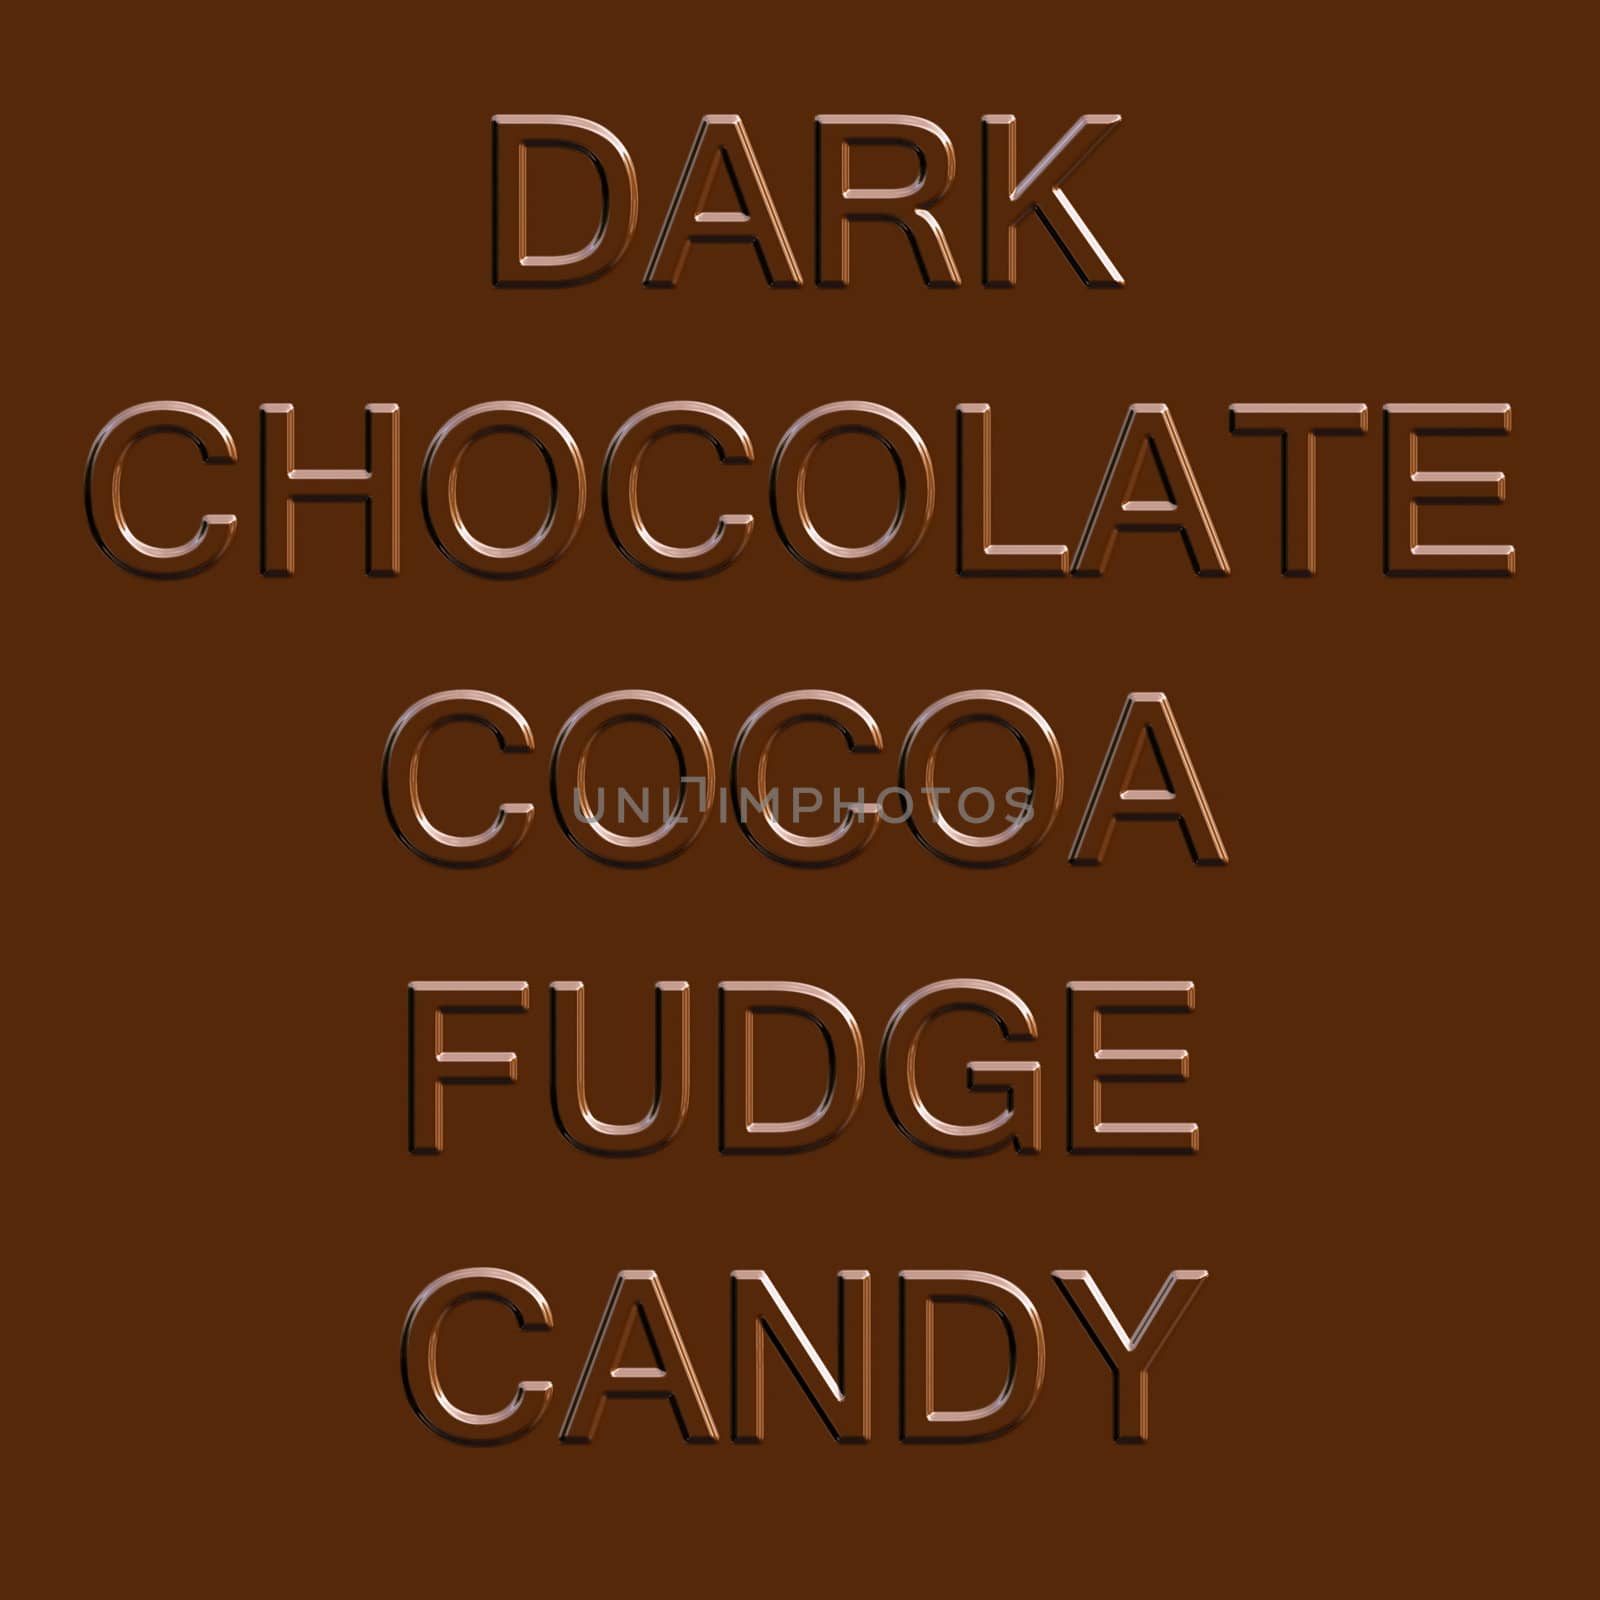 Chocolate related word elements isolated over a dark brown fudge bar background.